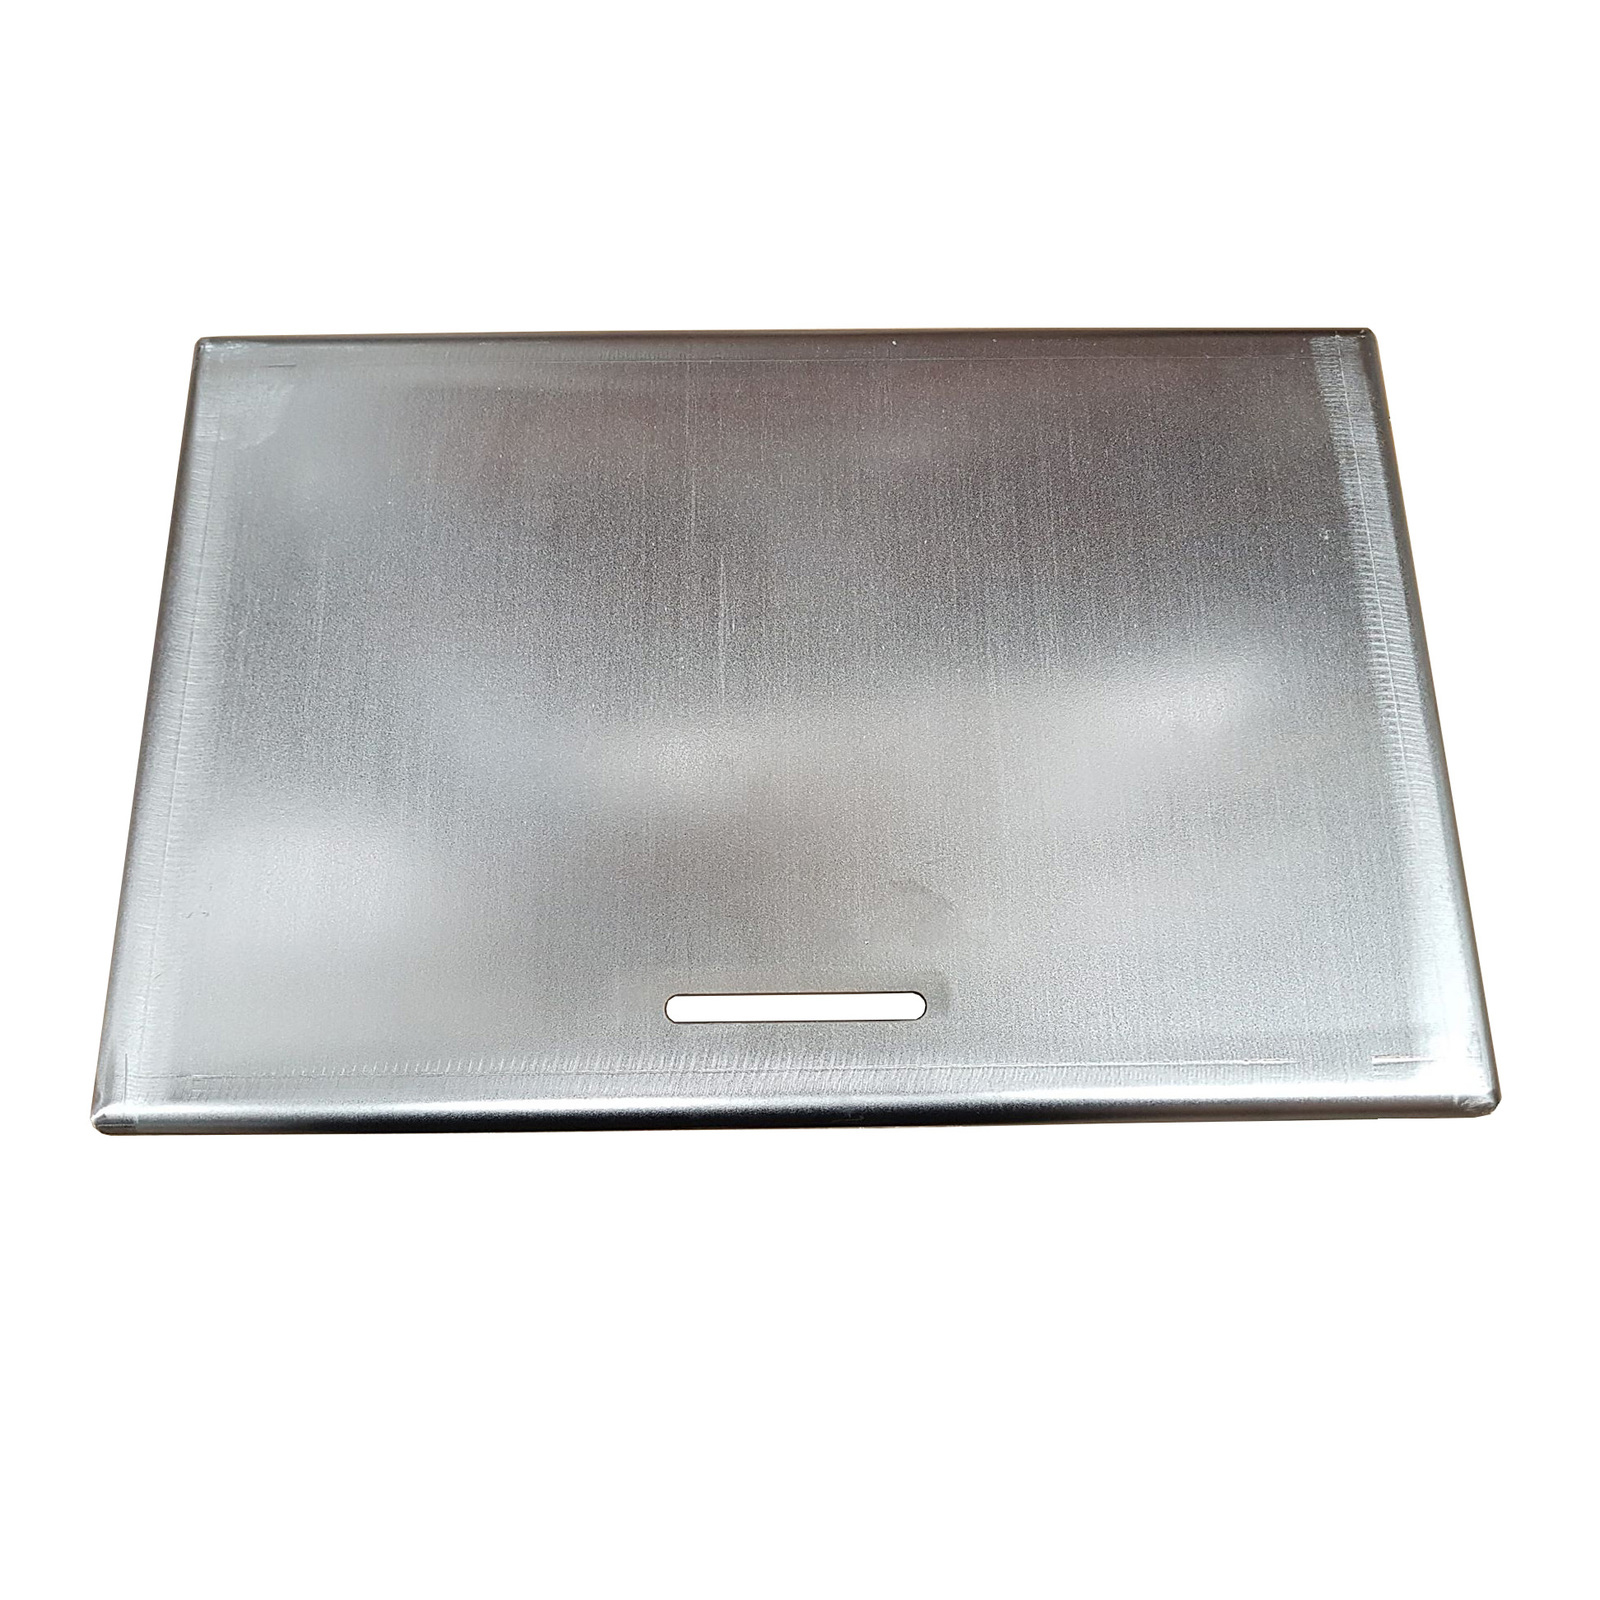 Topnotch Stainless Steel Hot Plate 317x485mm - PSS317X485